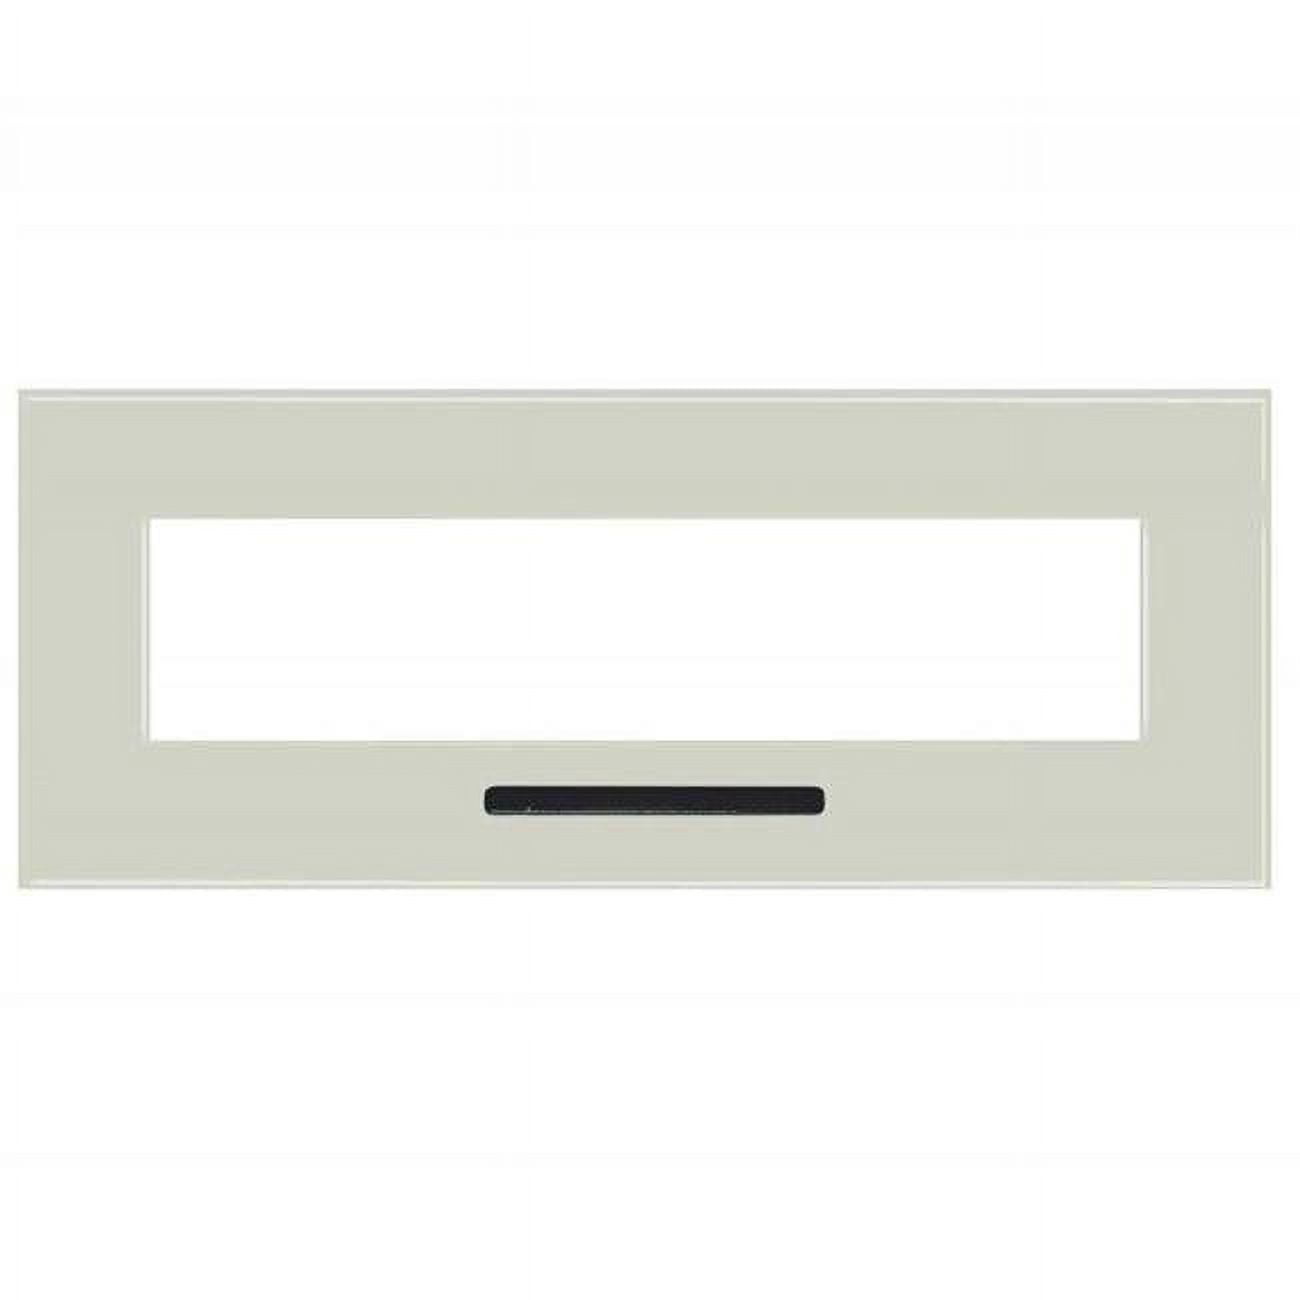 100 X 23 In. White Glass Surround For Wm10023flu Fireplace Inserts